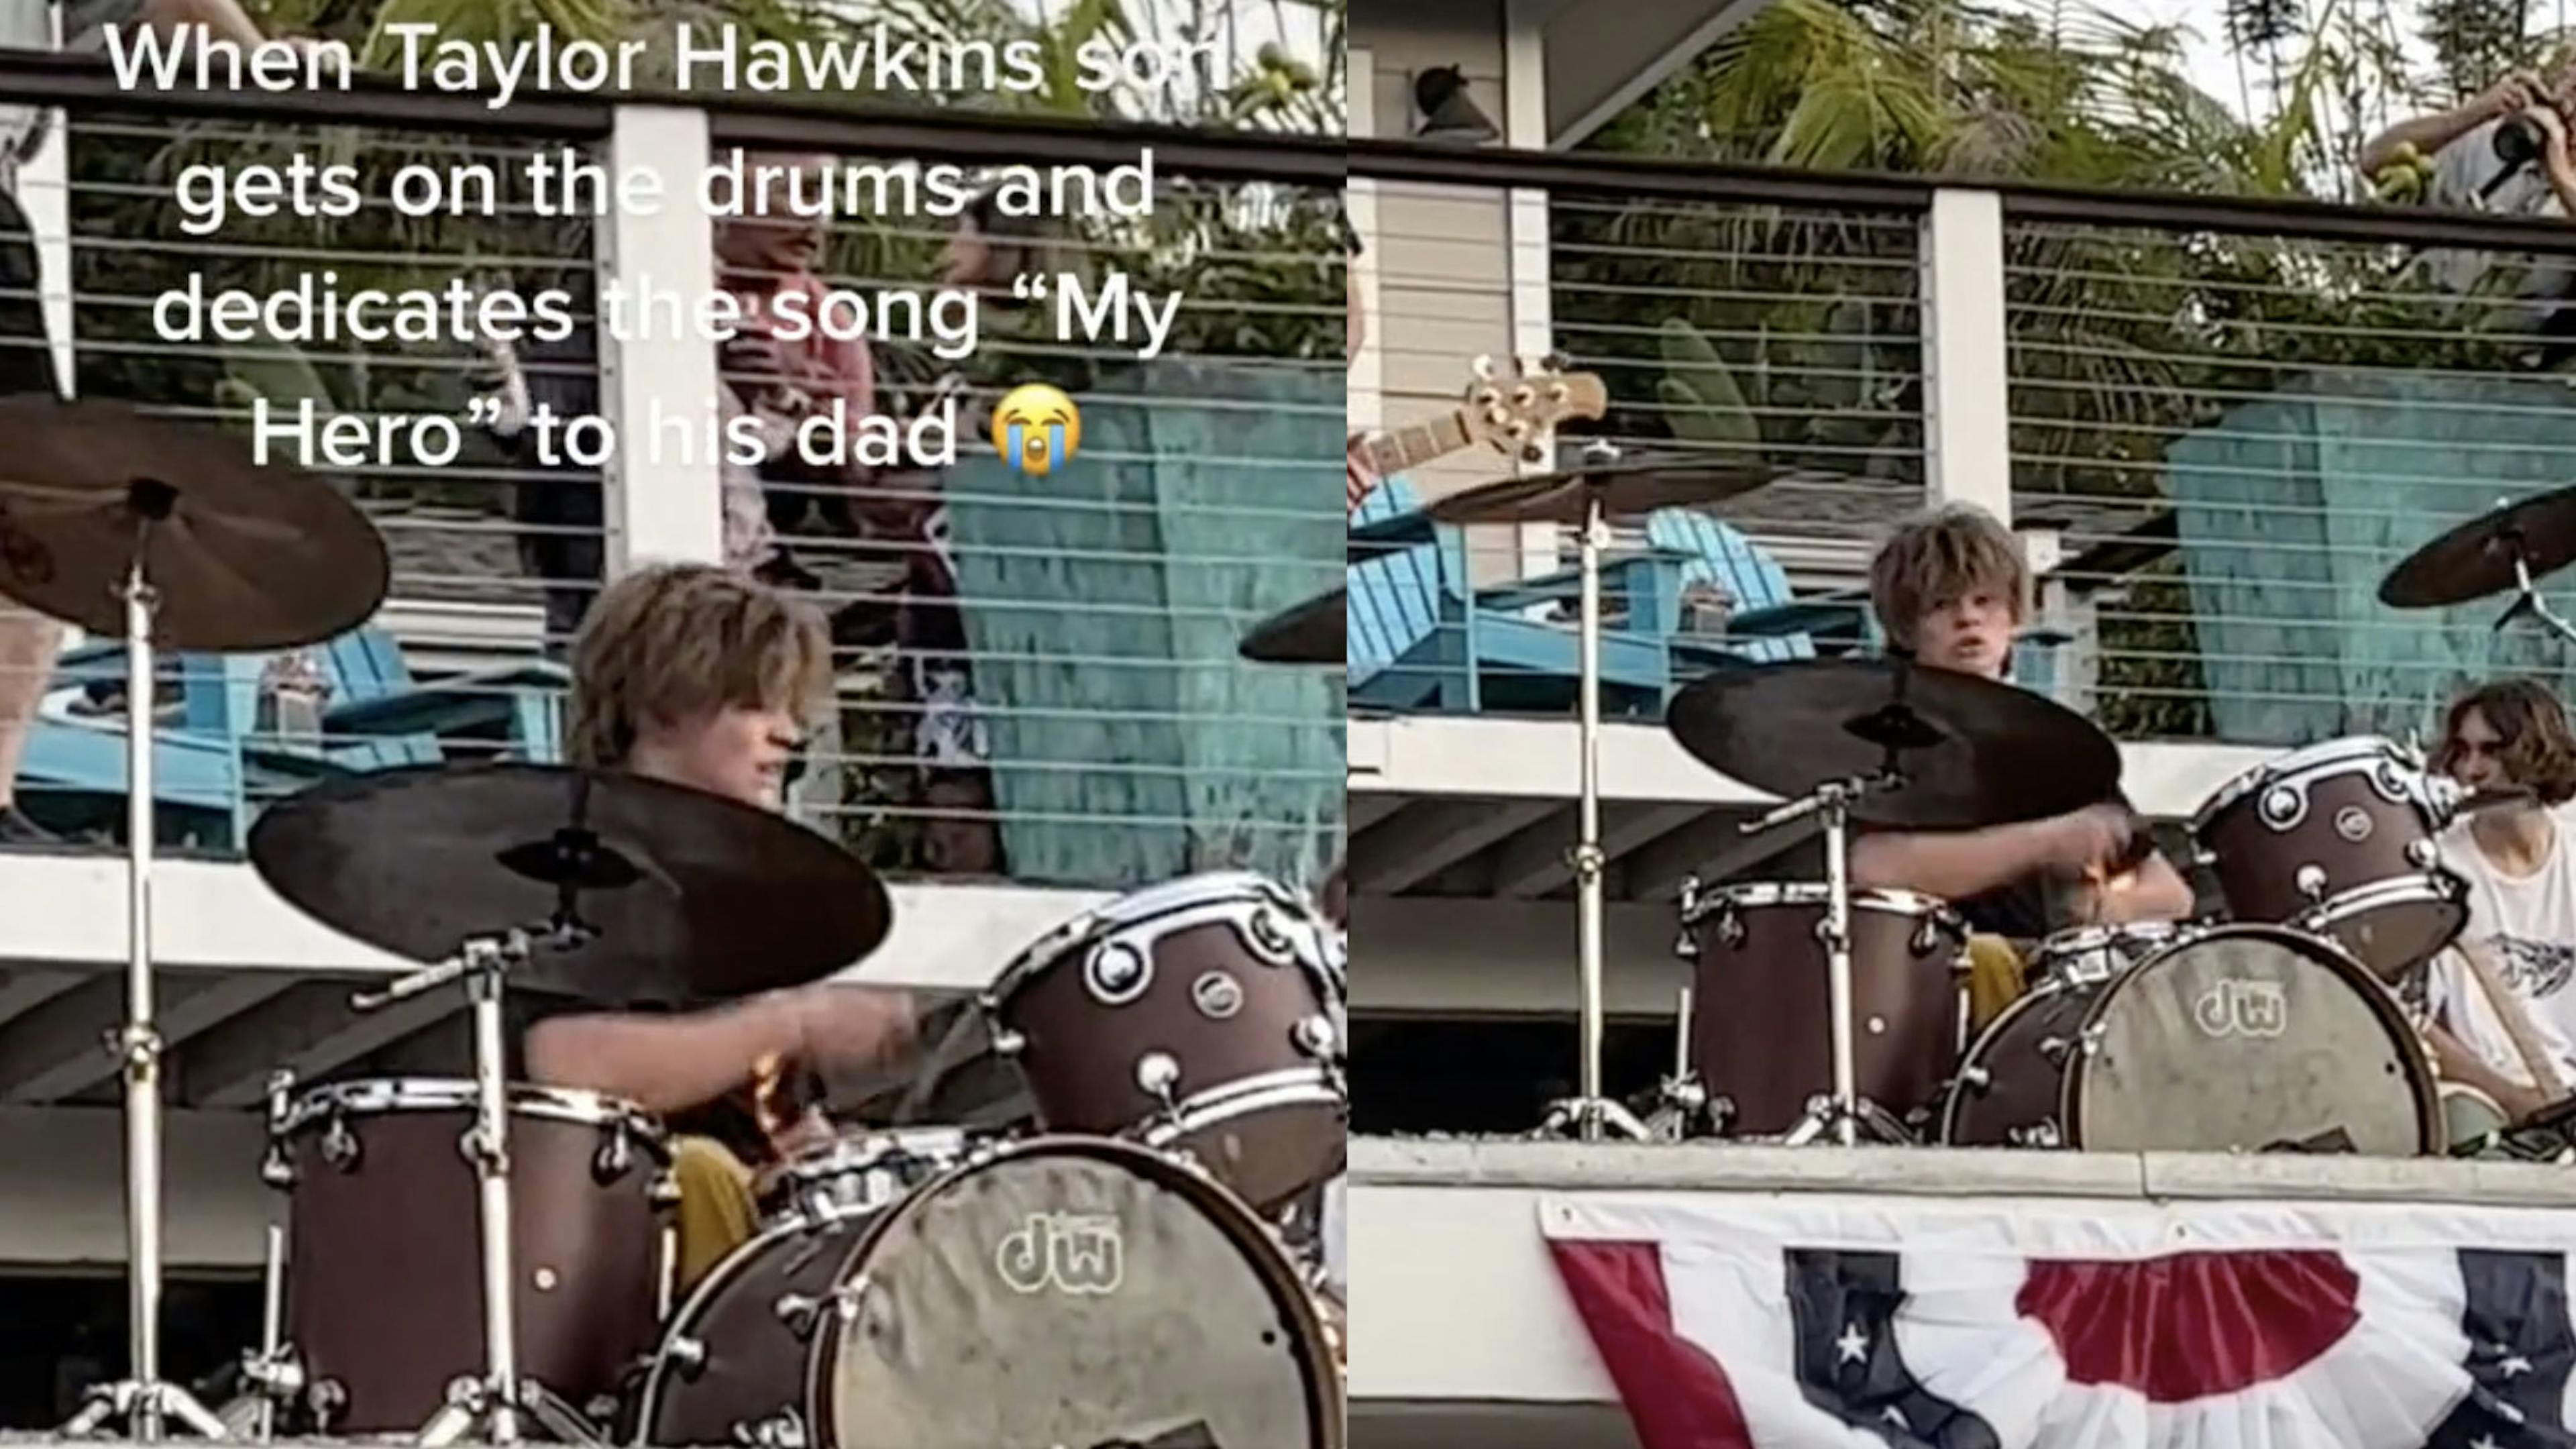 See Taylor Hawkins’ son cover My Hero with local band